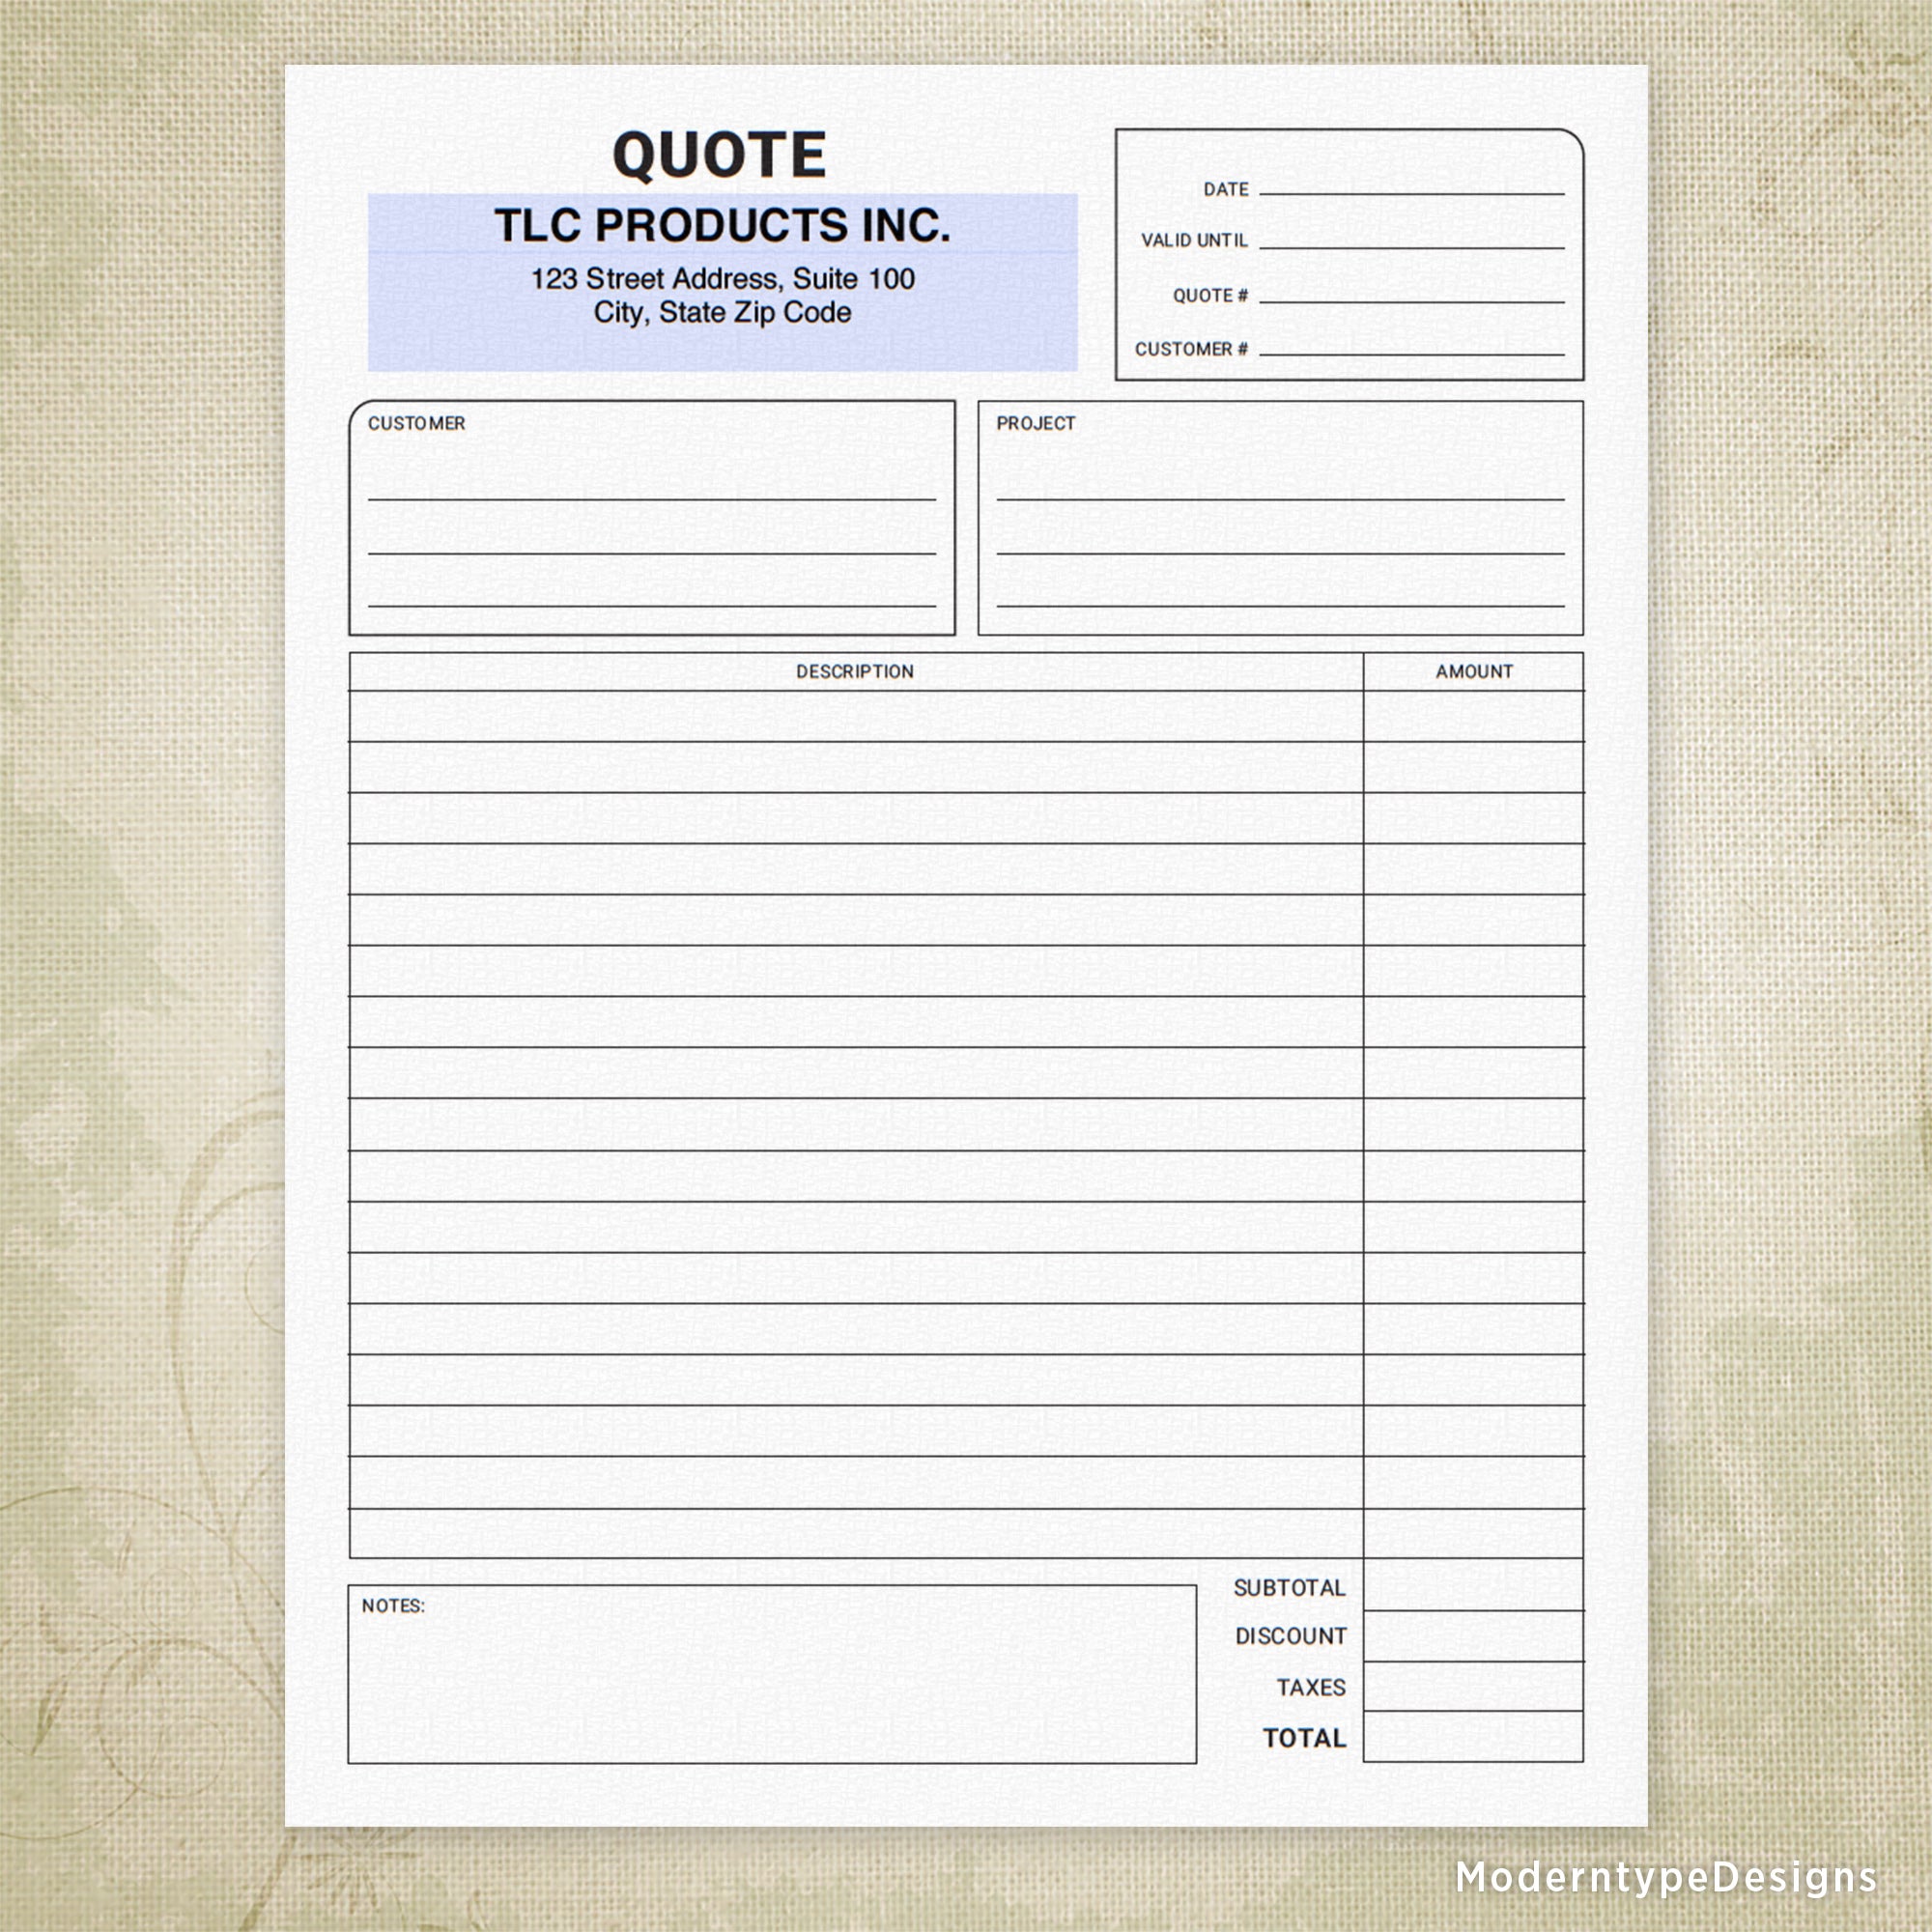 Price Quote Printable Form with Lines, Personalized